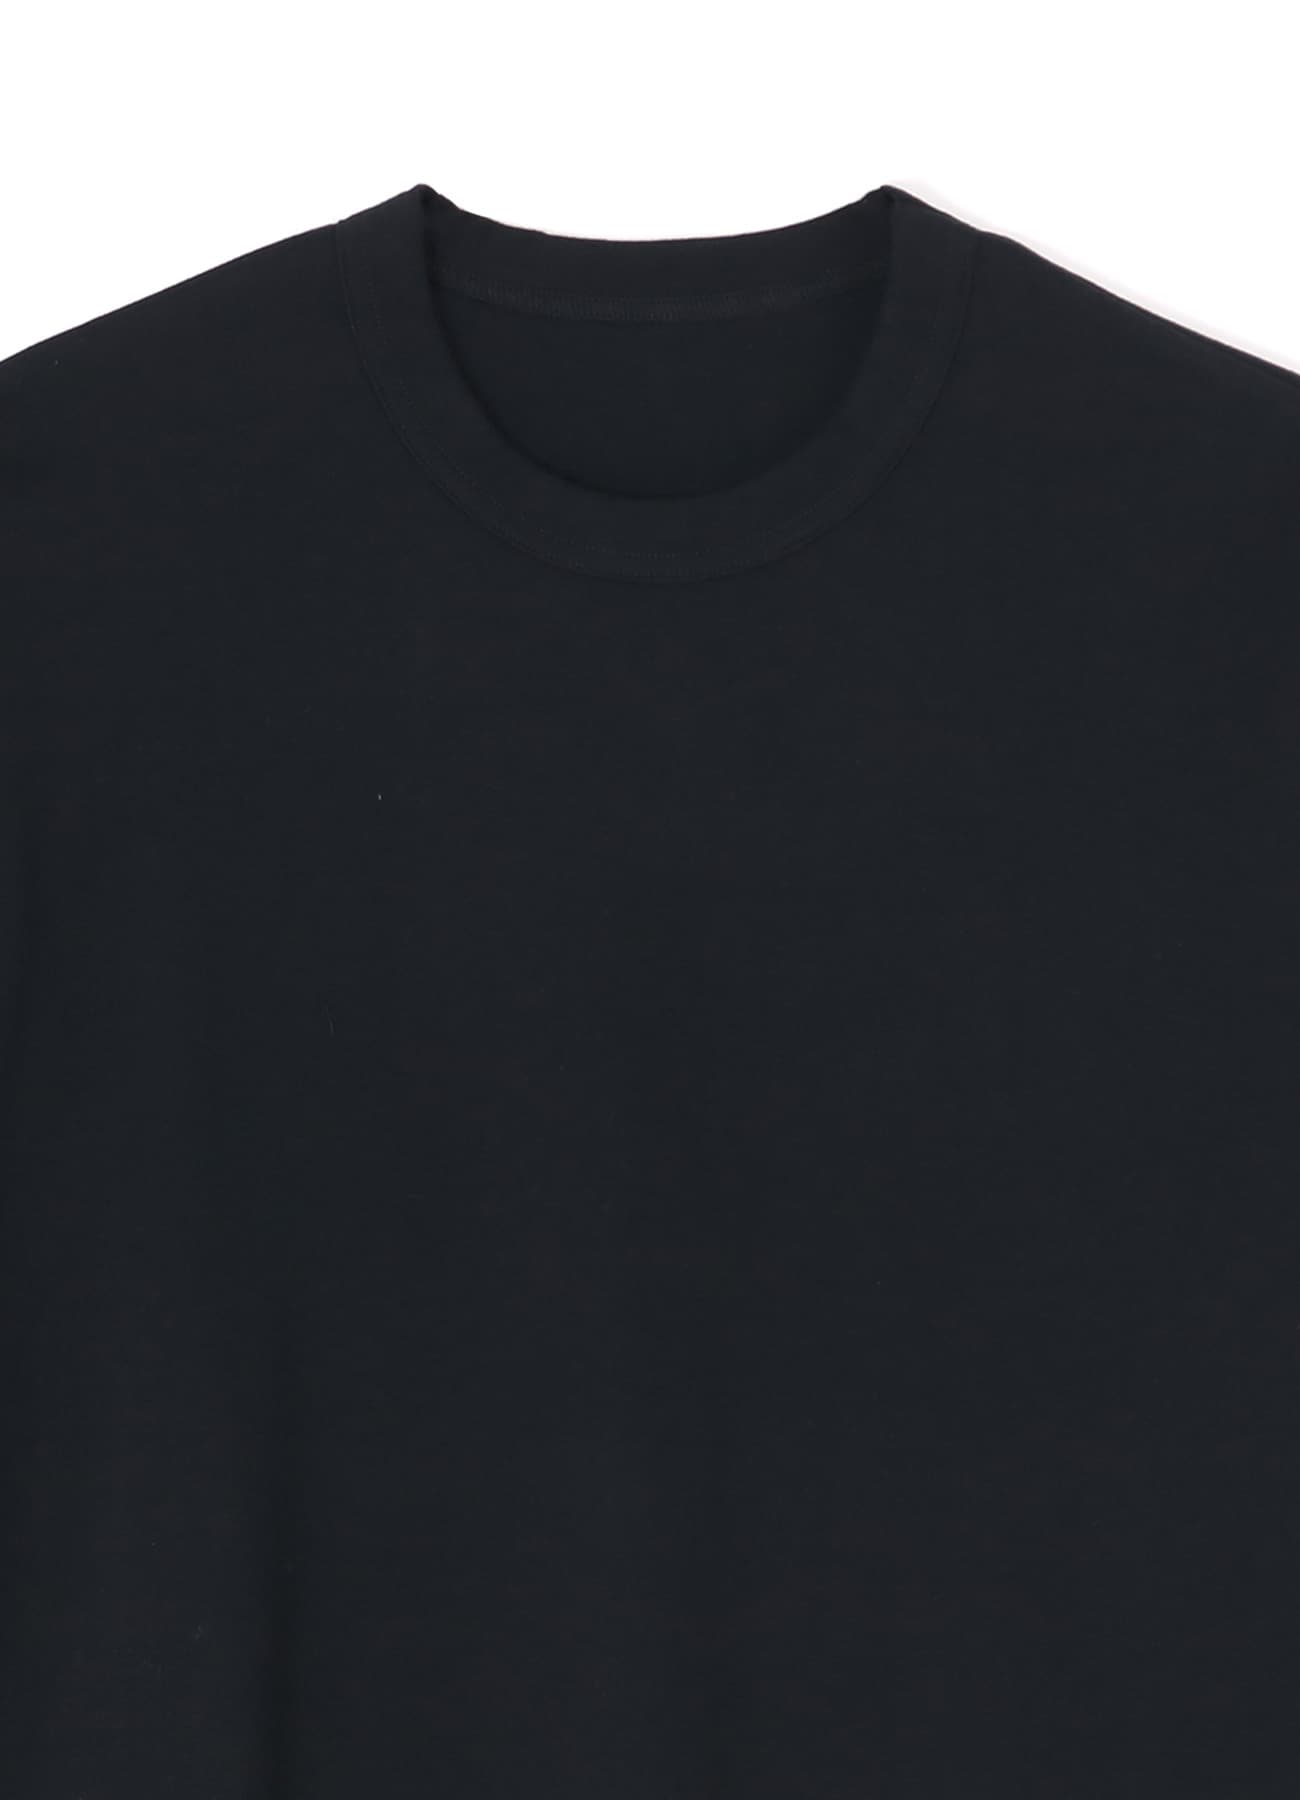 40/2 COTTON JERSEY LONG SLEEVE SHIRT (L)(L Black): Y's for living